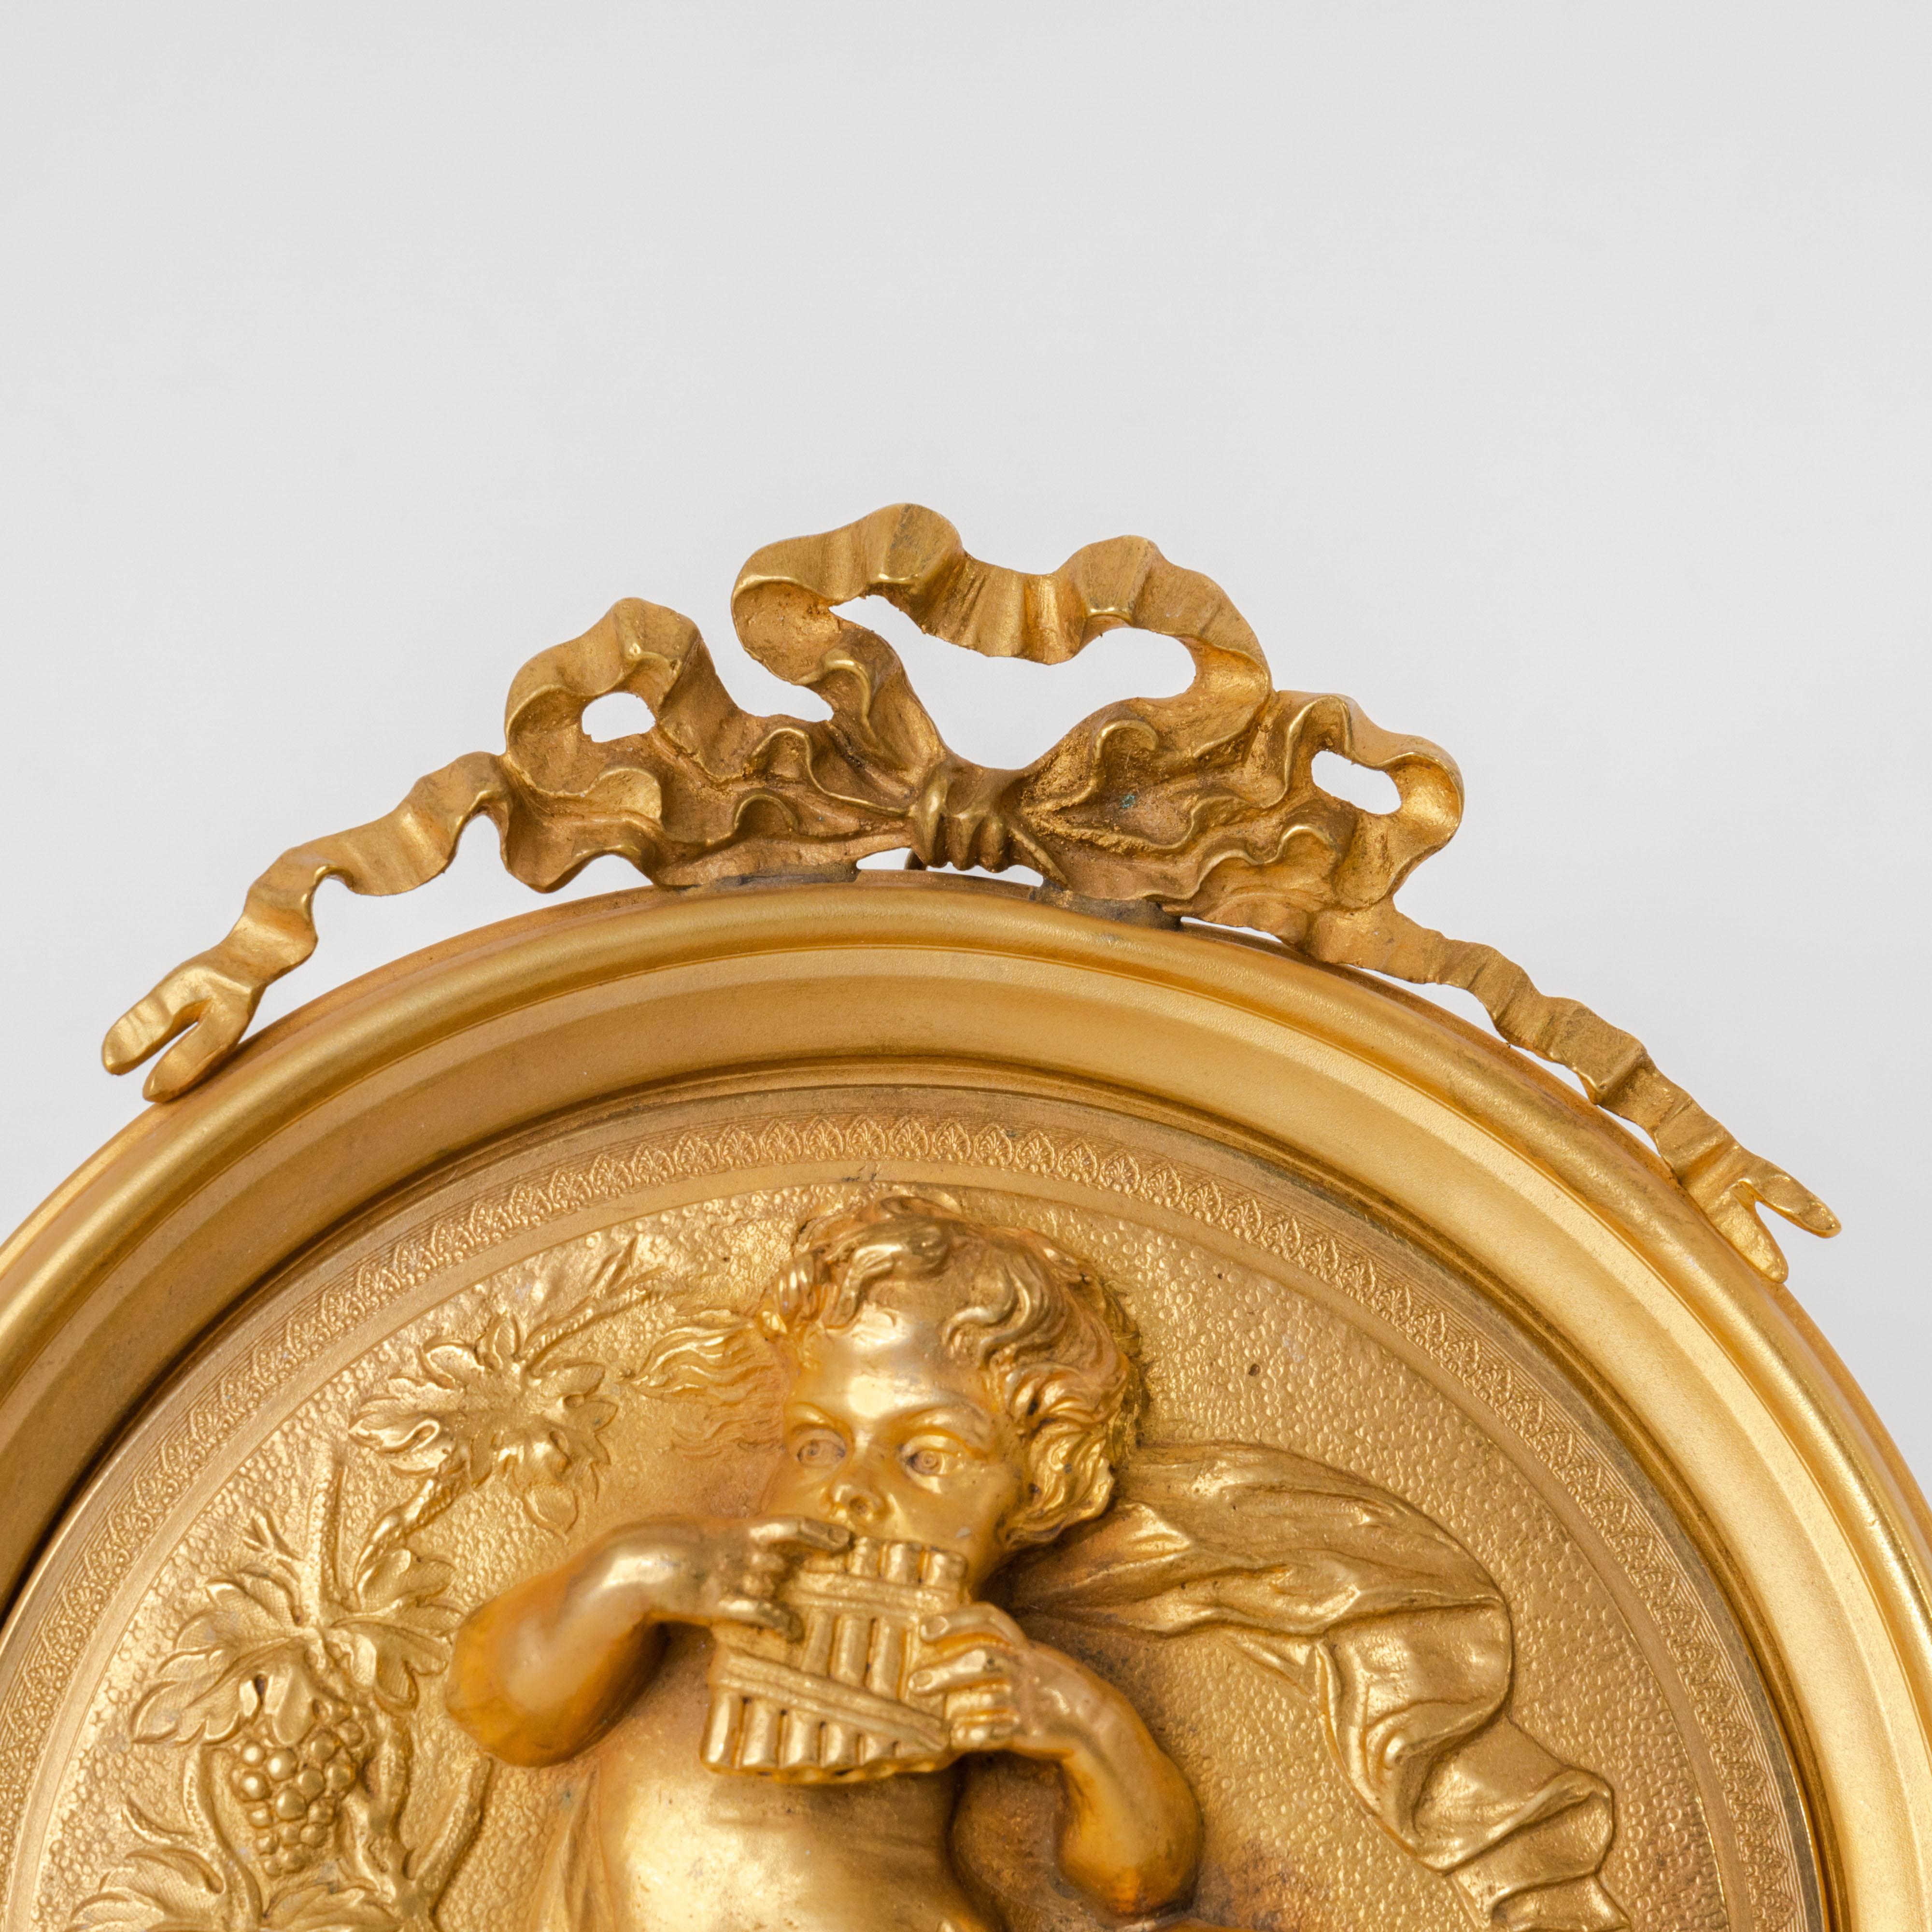 Cast Pair of French Gilt Bronze Round Figural Wall Plaques, France, 19th Century For Sale